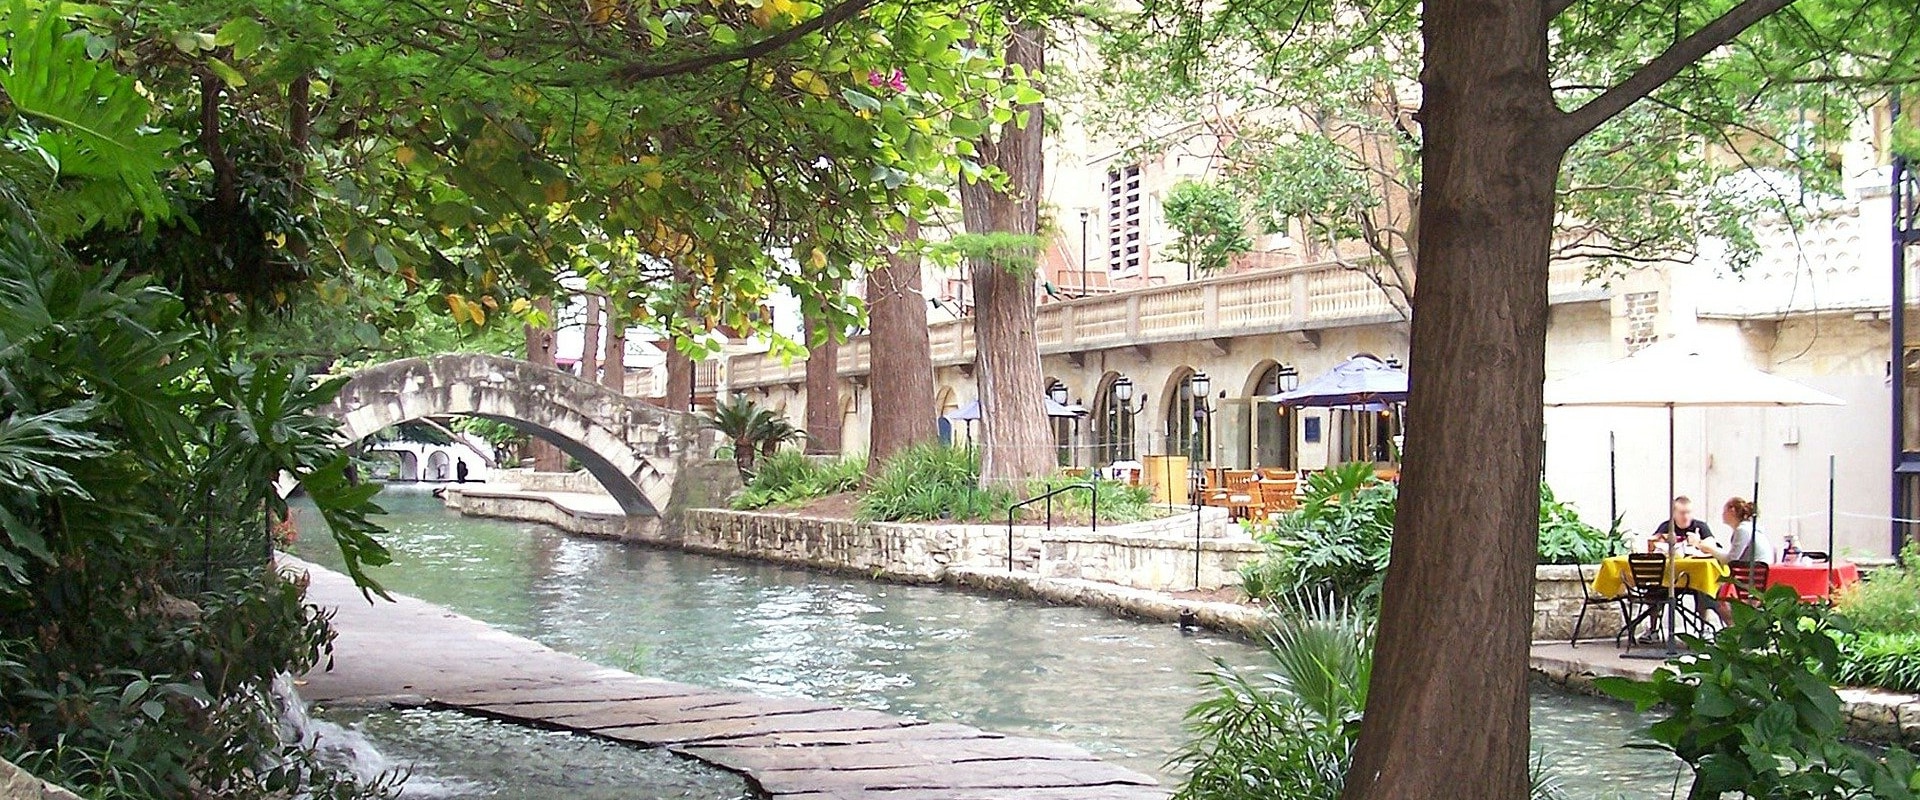 Is san antonio a safe place to live?